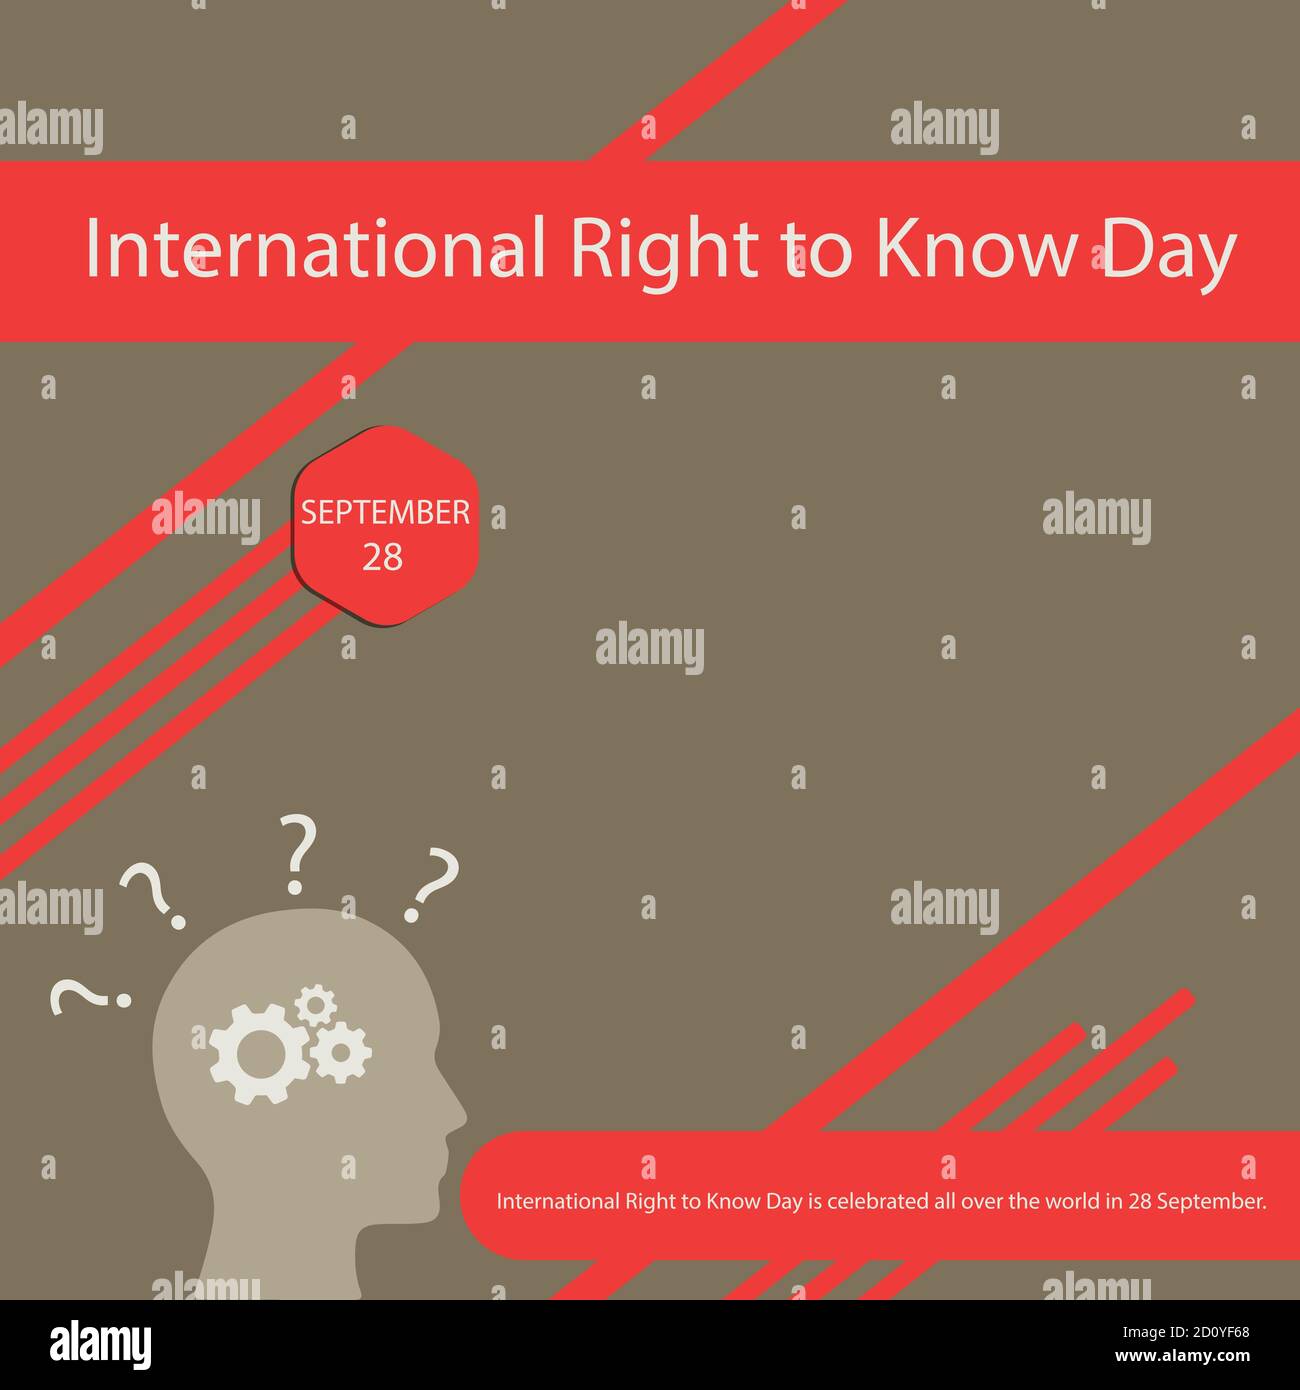 International Right to Know Day is celebrated all over the world in 28 September. Stock Vector